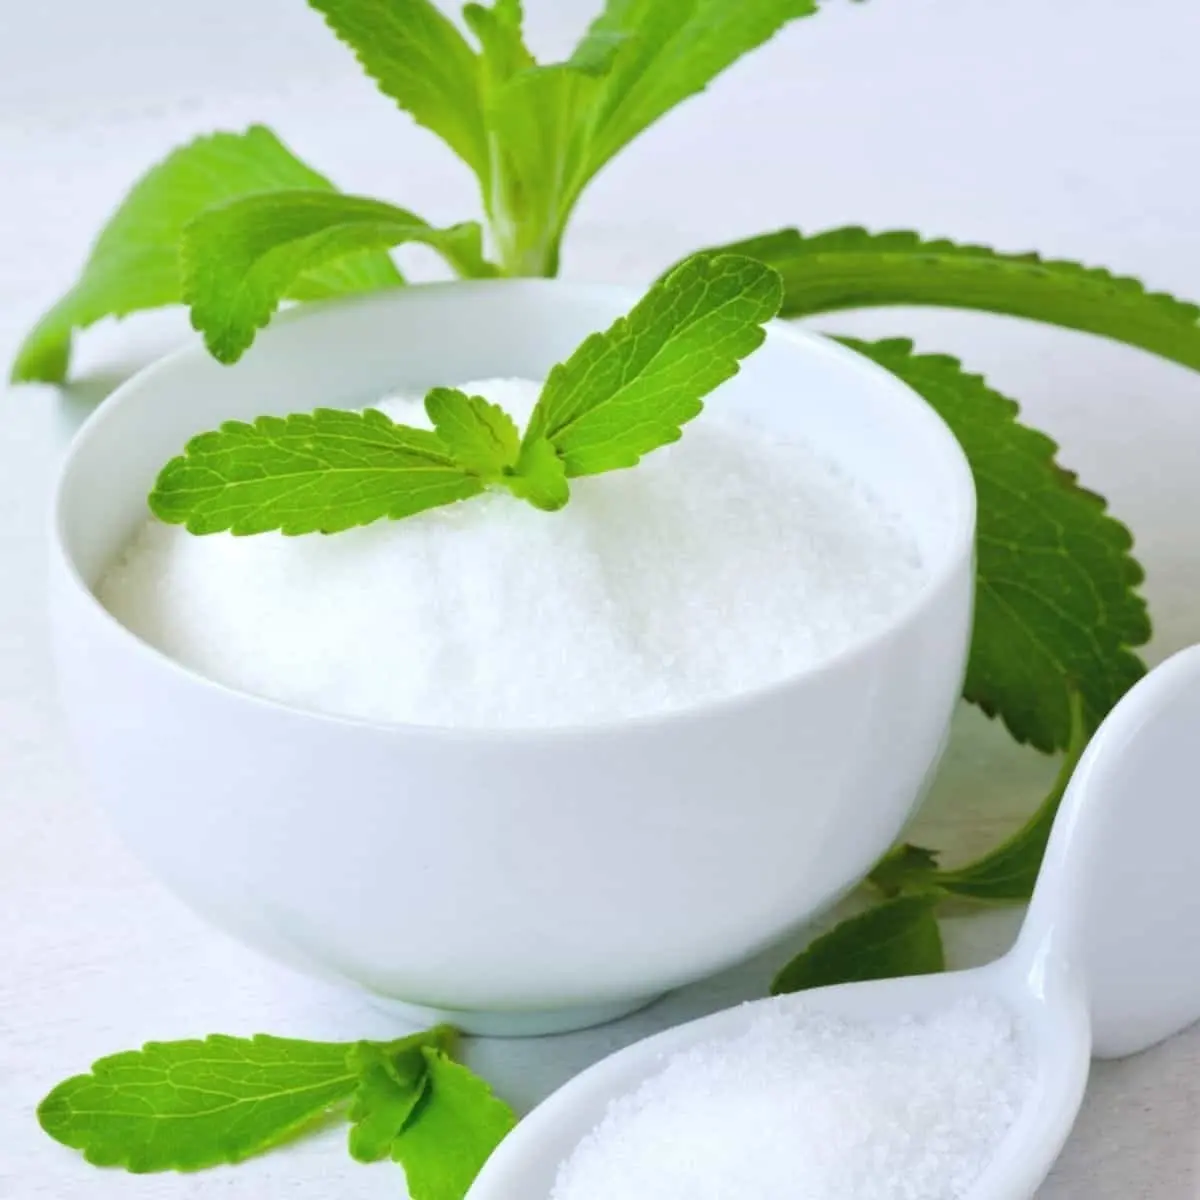 Best Price Reb A Stevia Leaf Extract Powder 97% Rebaudioside A For Wholesale And Export Private Labelling Available